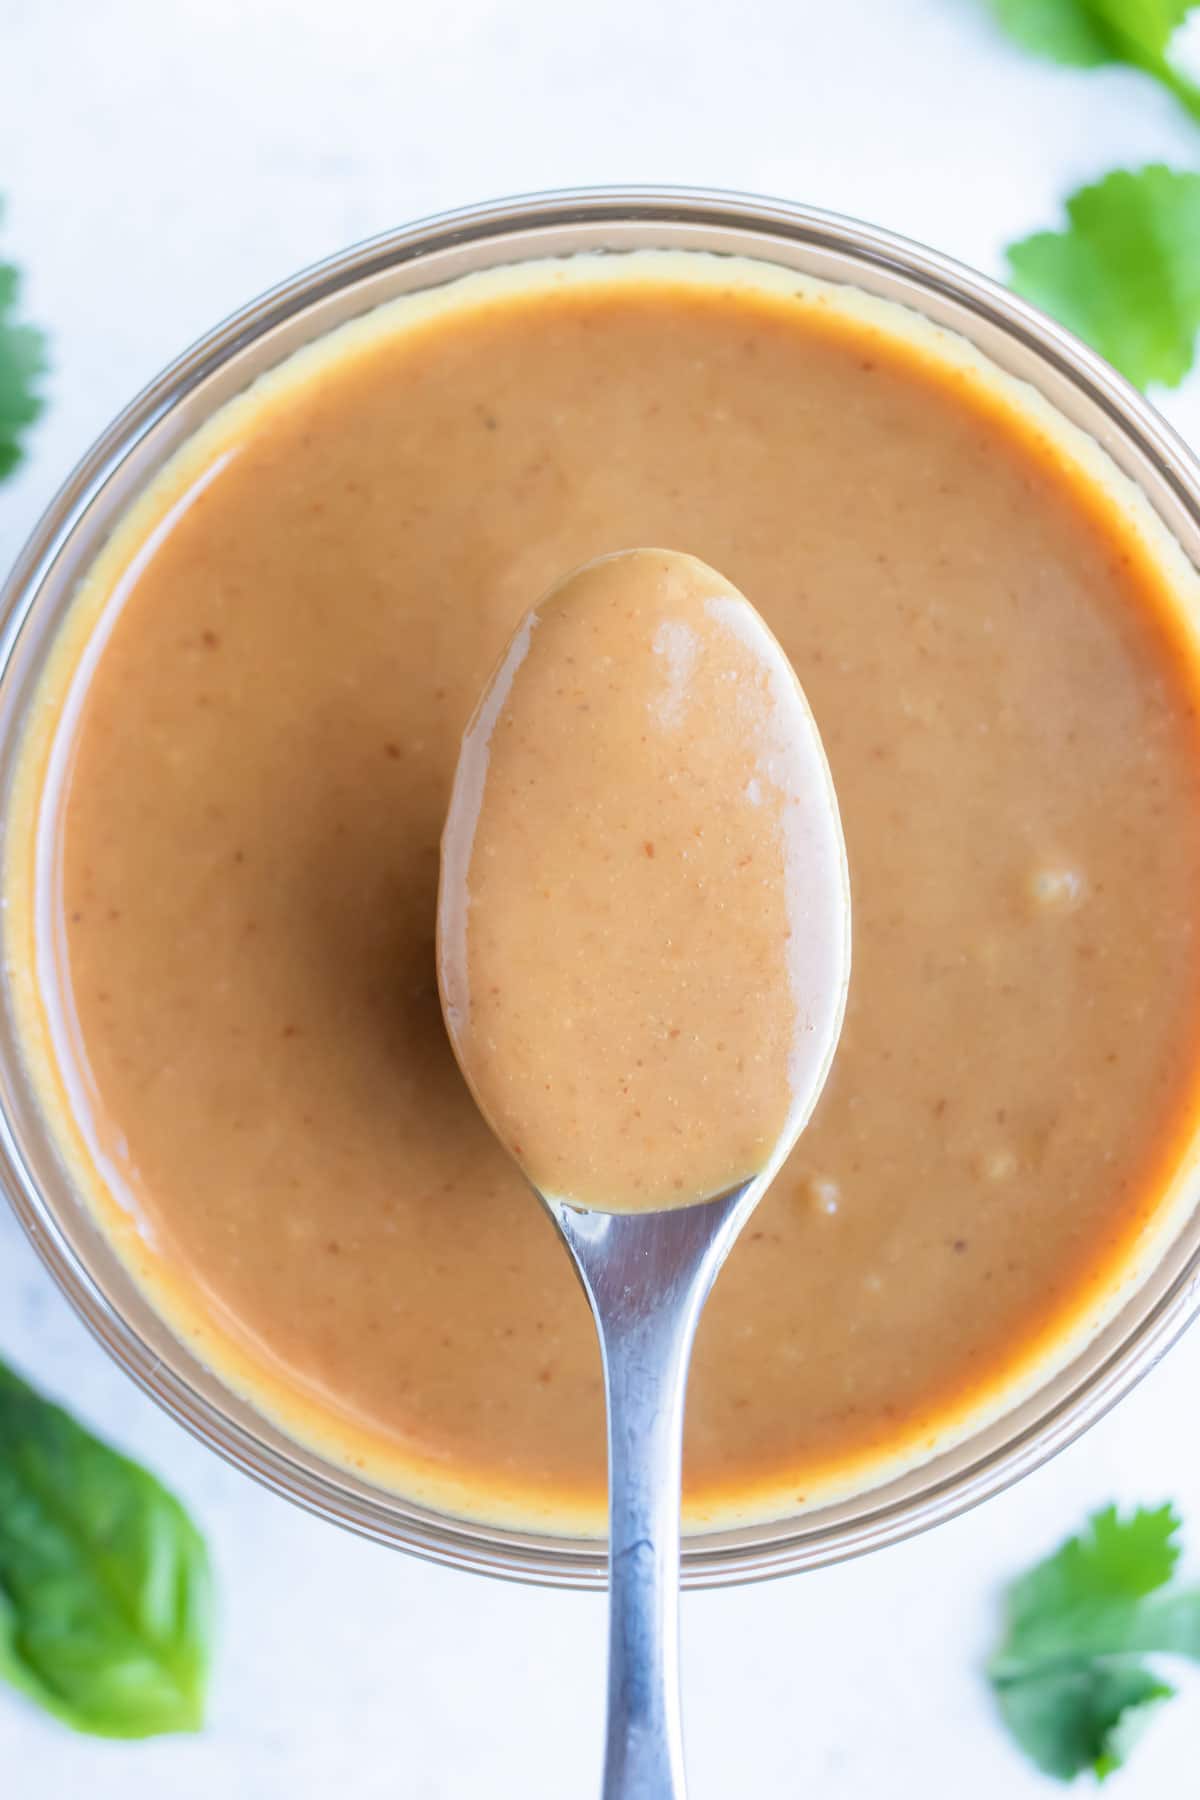 Easy peanut dipping sauce is lifted up with a spoon.